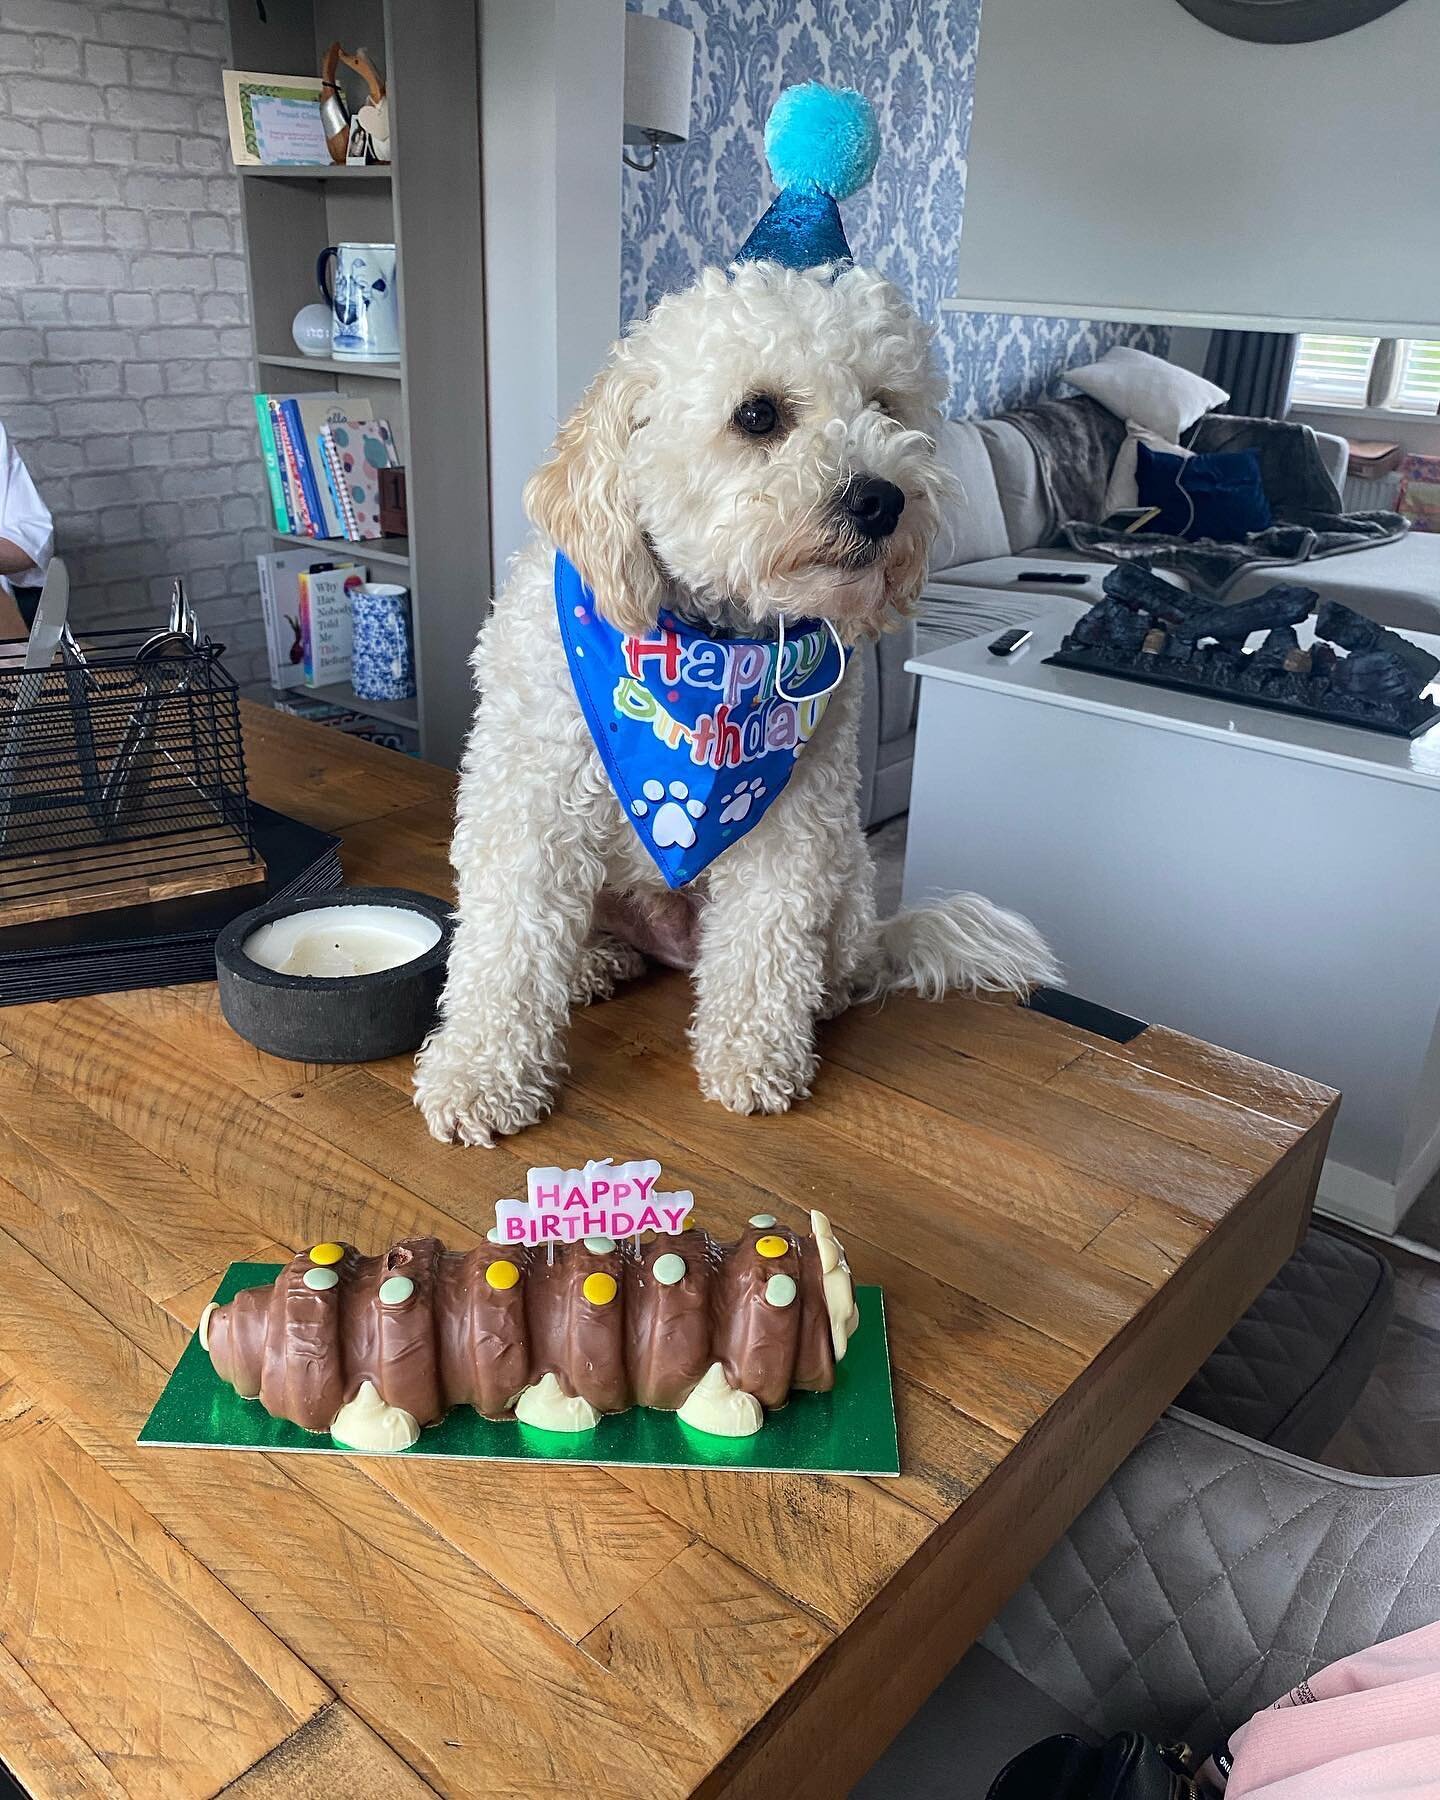 Happy 2nd Birthday to our youngest team member. 

#winstanleysremovals #removalsandstorage #cavapoo #cavapoochon #dogslife #happybirthday #itsmybirthday #dogsbirthday #dogsarefamily